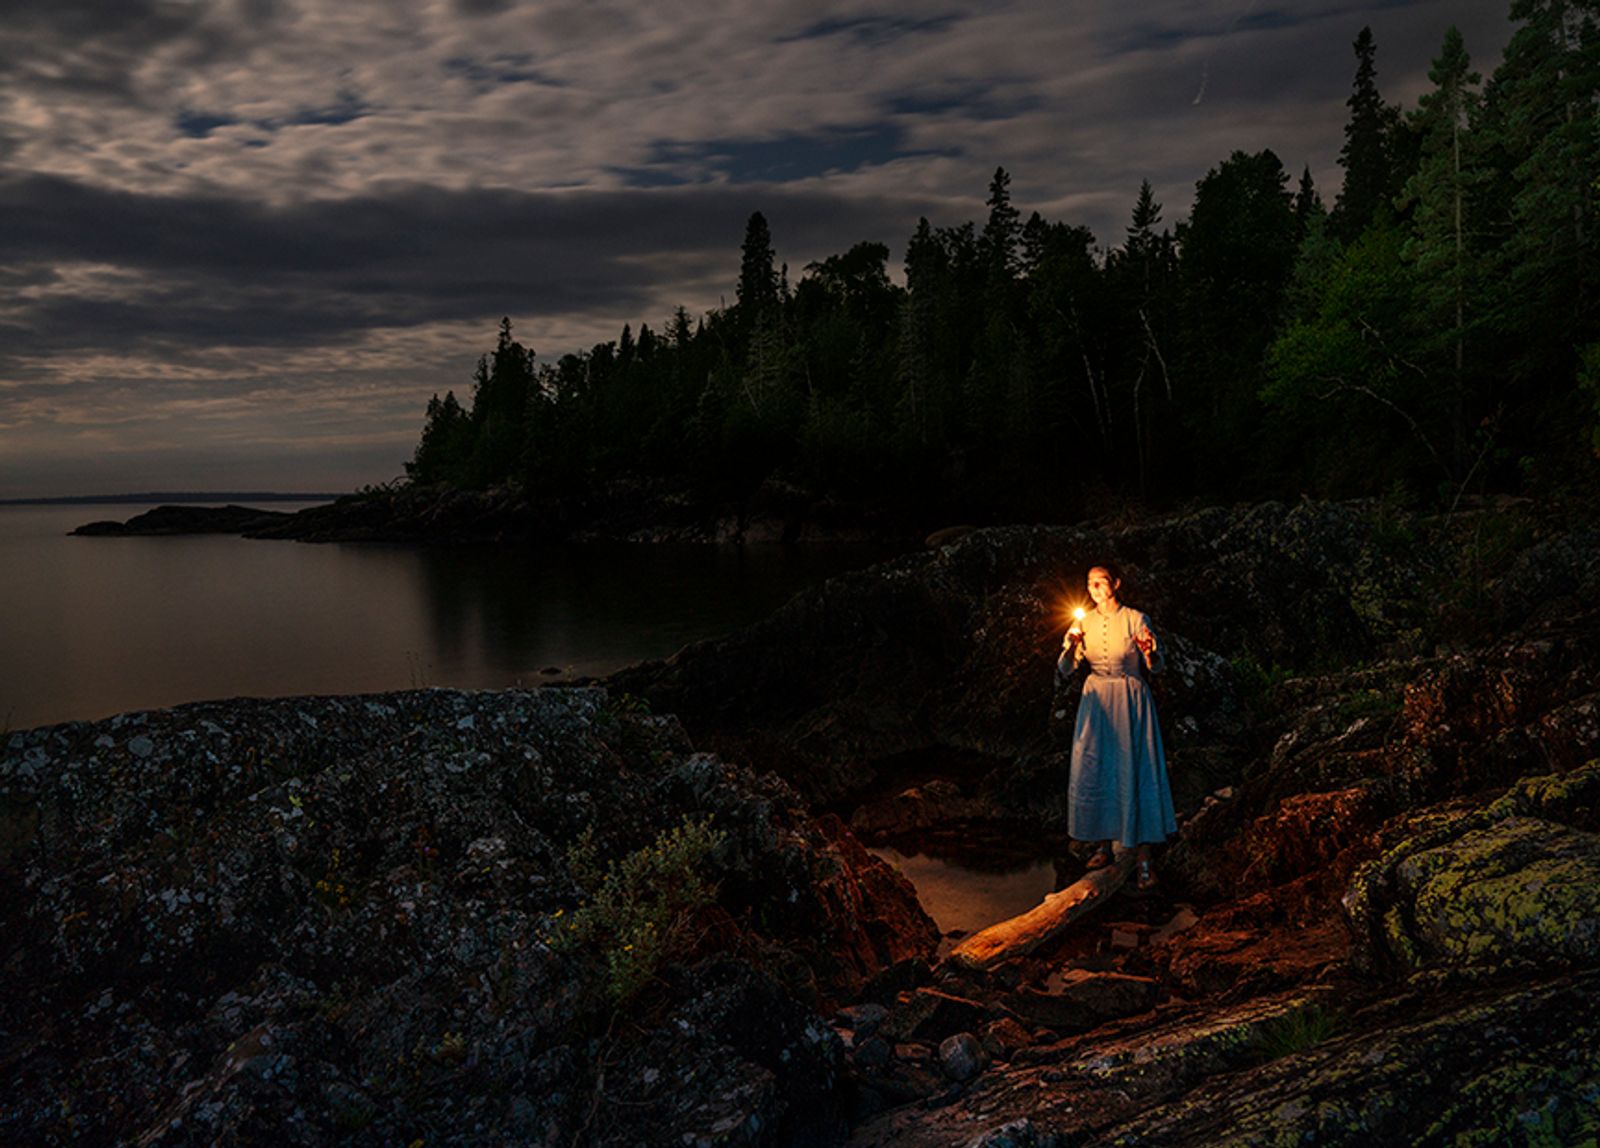 © Naomi Harris - Image from the I, Voyageur...In Search of Frances Anne Hopkins photography project